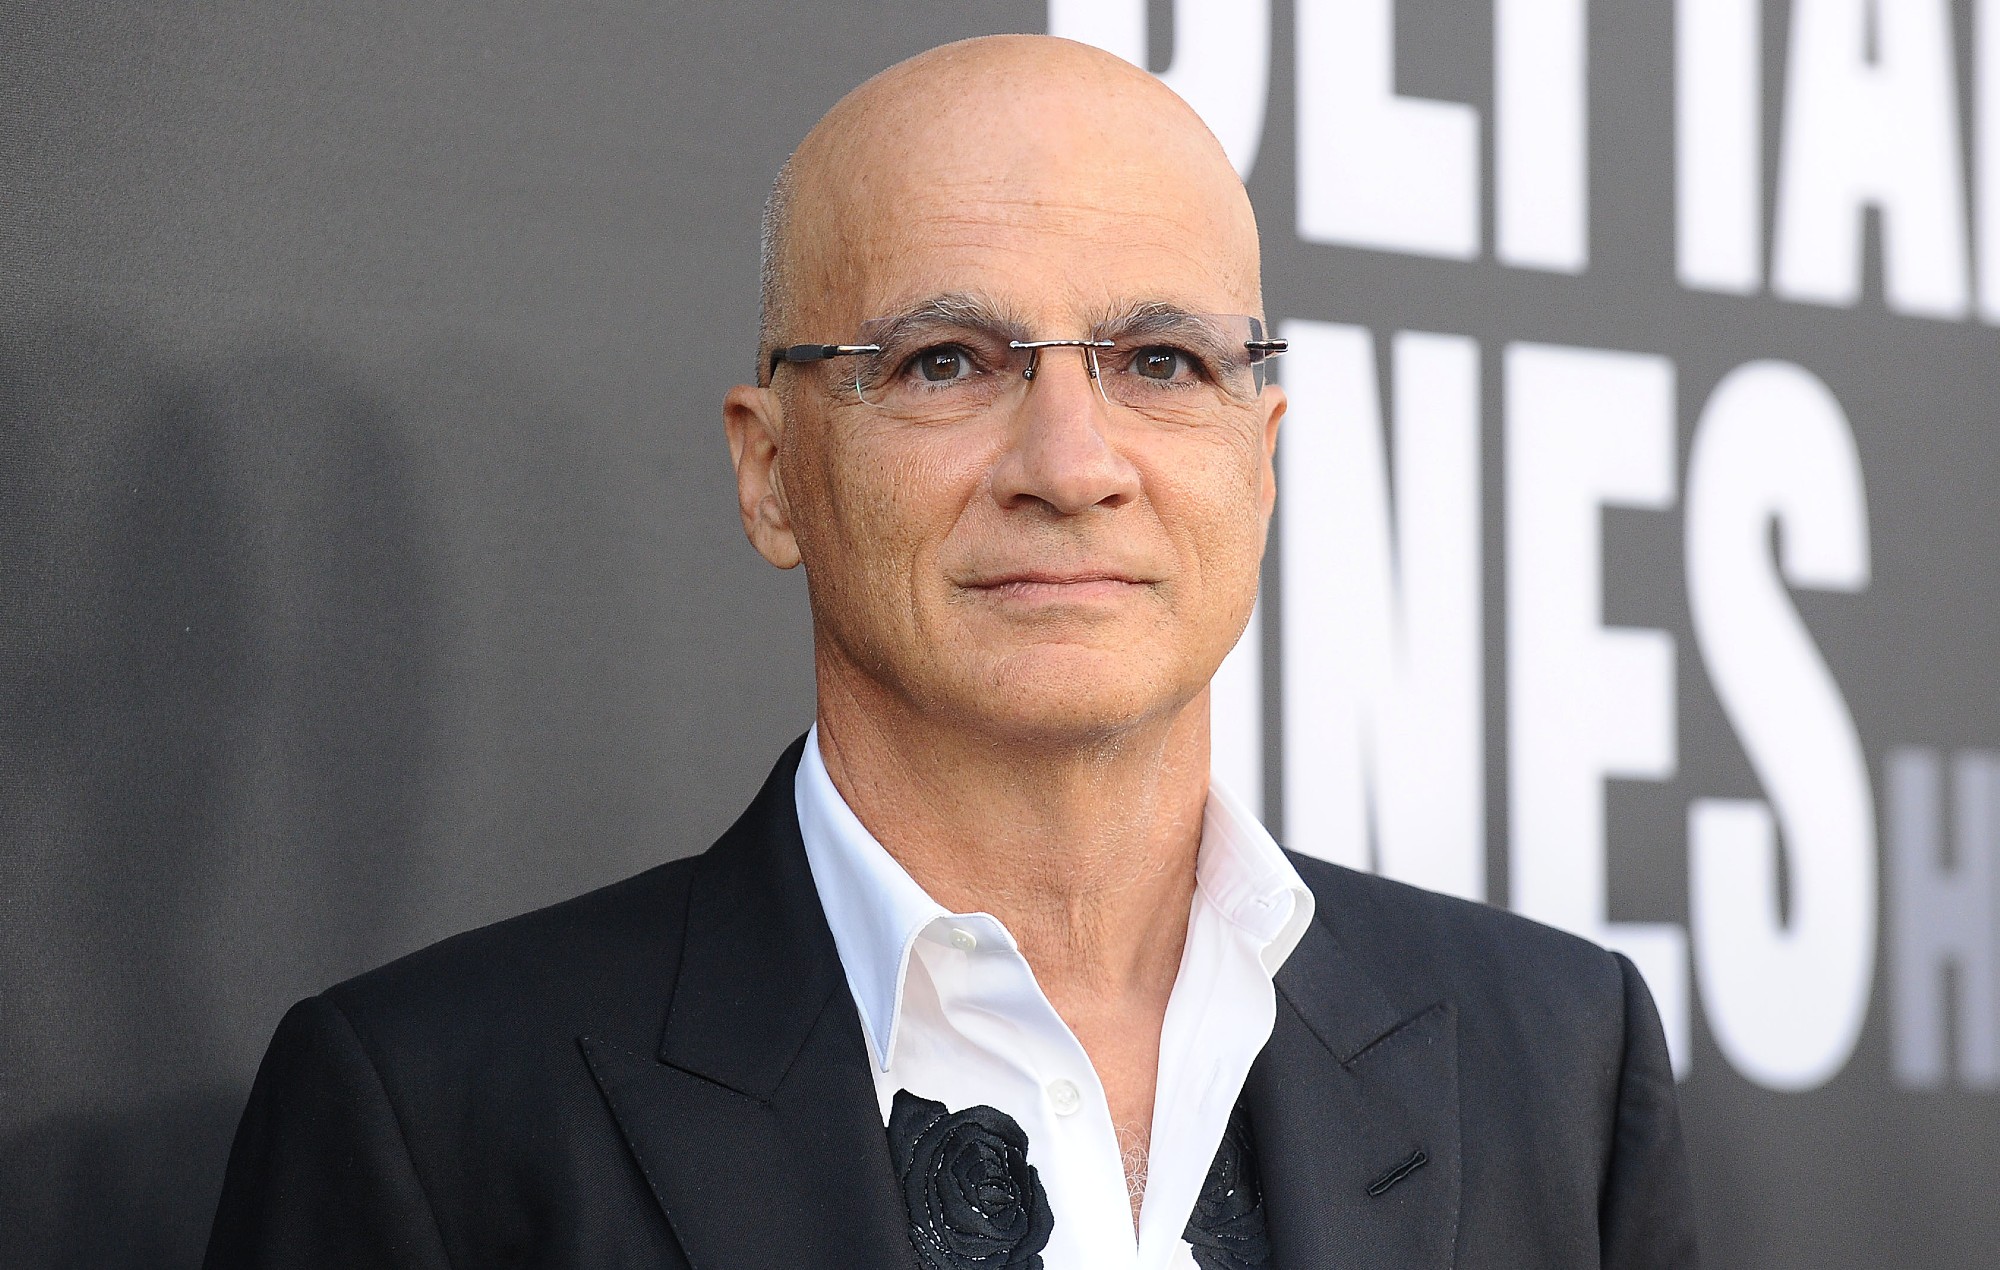 Jimmy Iovine summoned in sexual abuse allegation